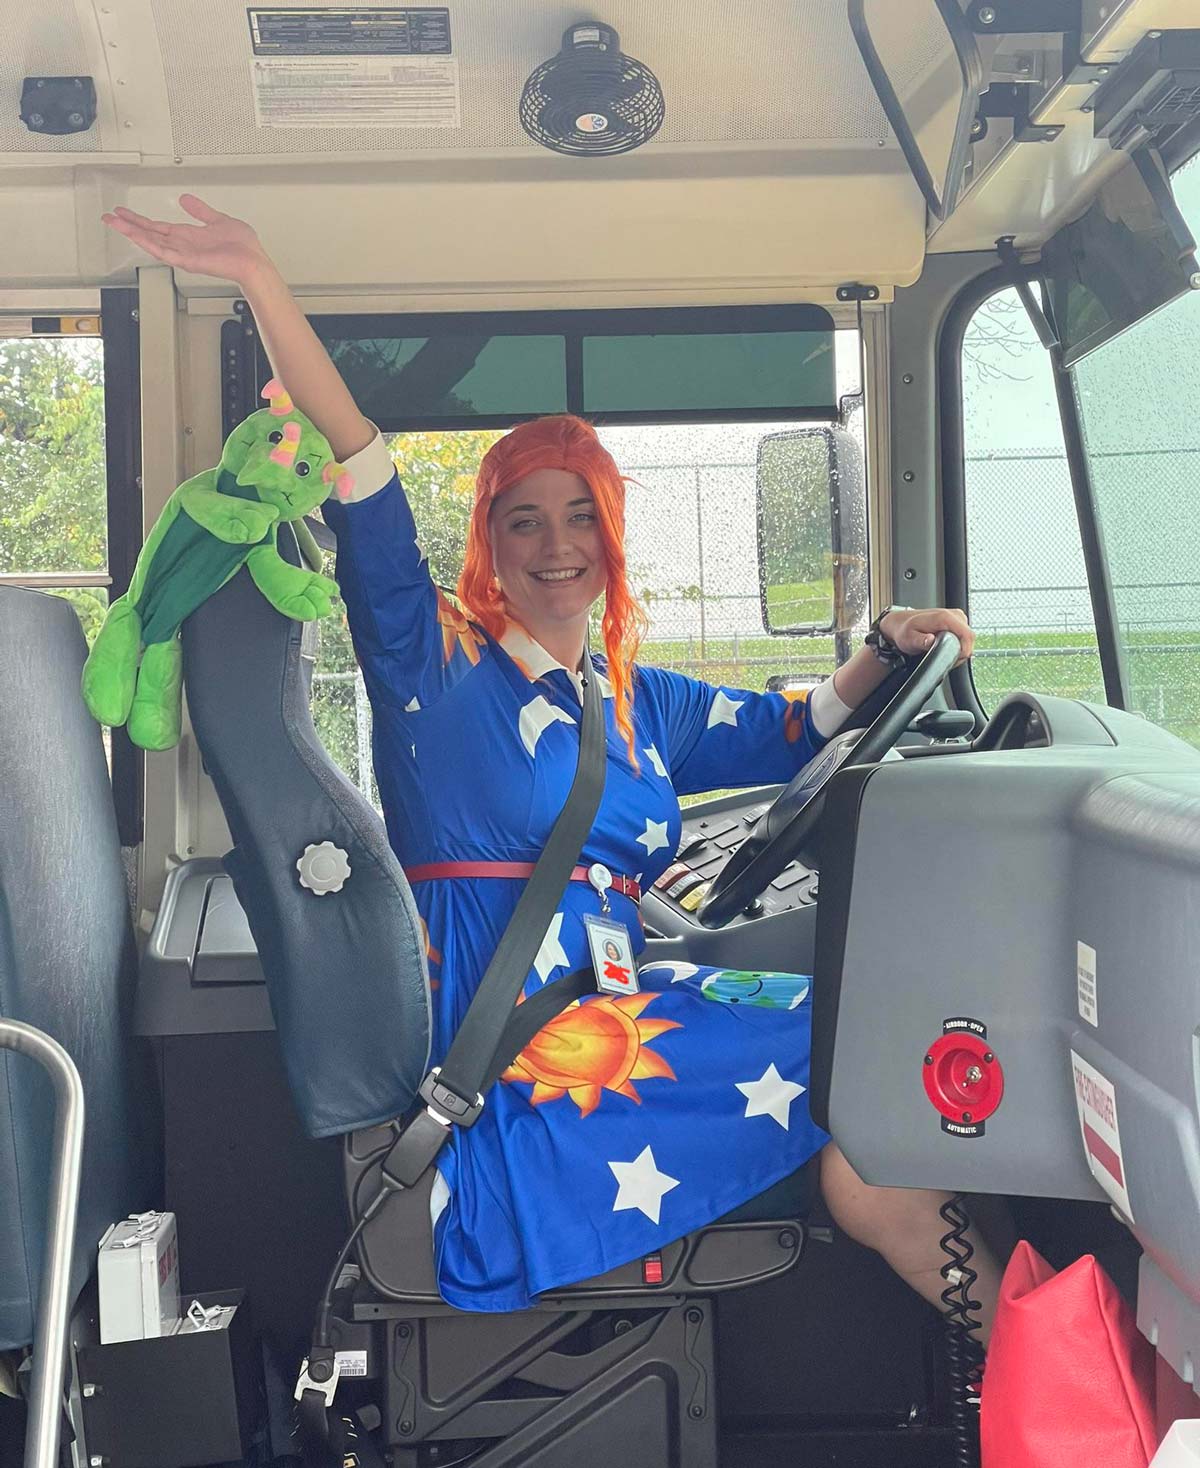 My wife is a school bus driver and dressed up as Ms. Frizzle for Halloween this year